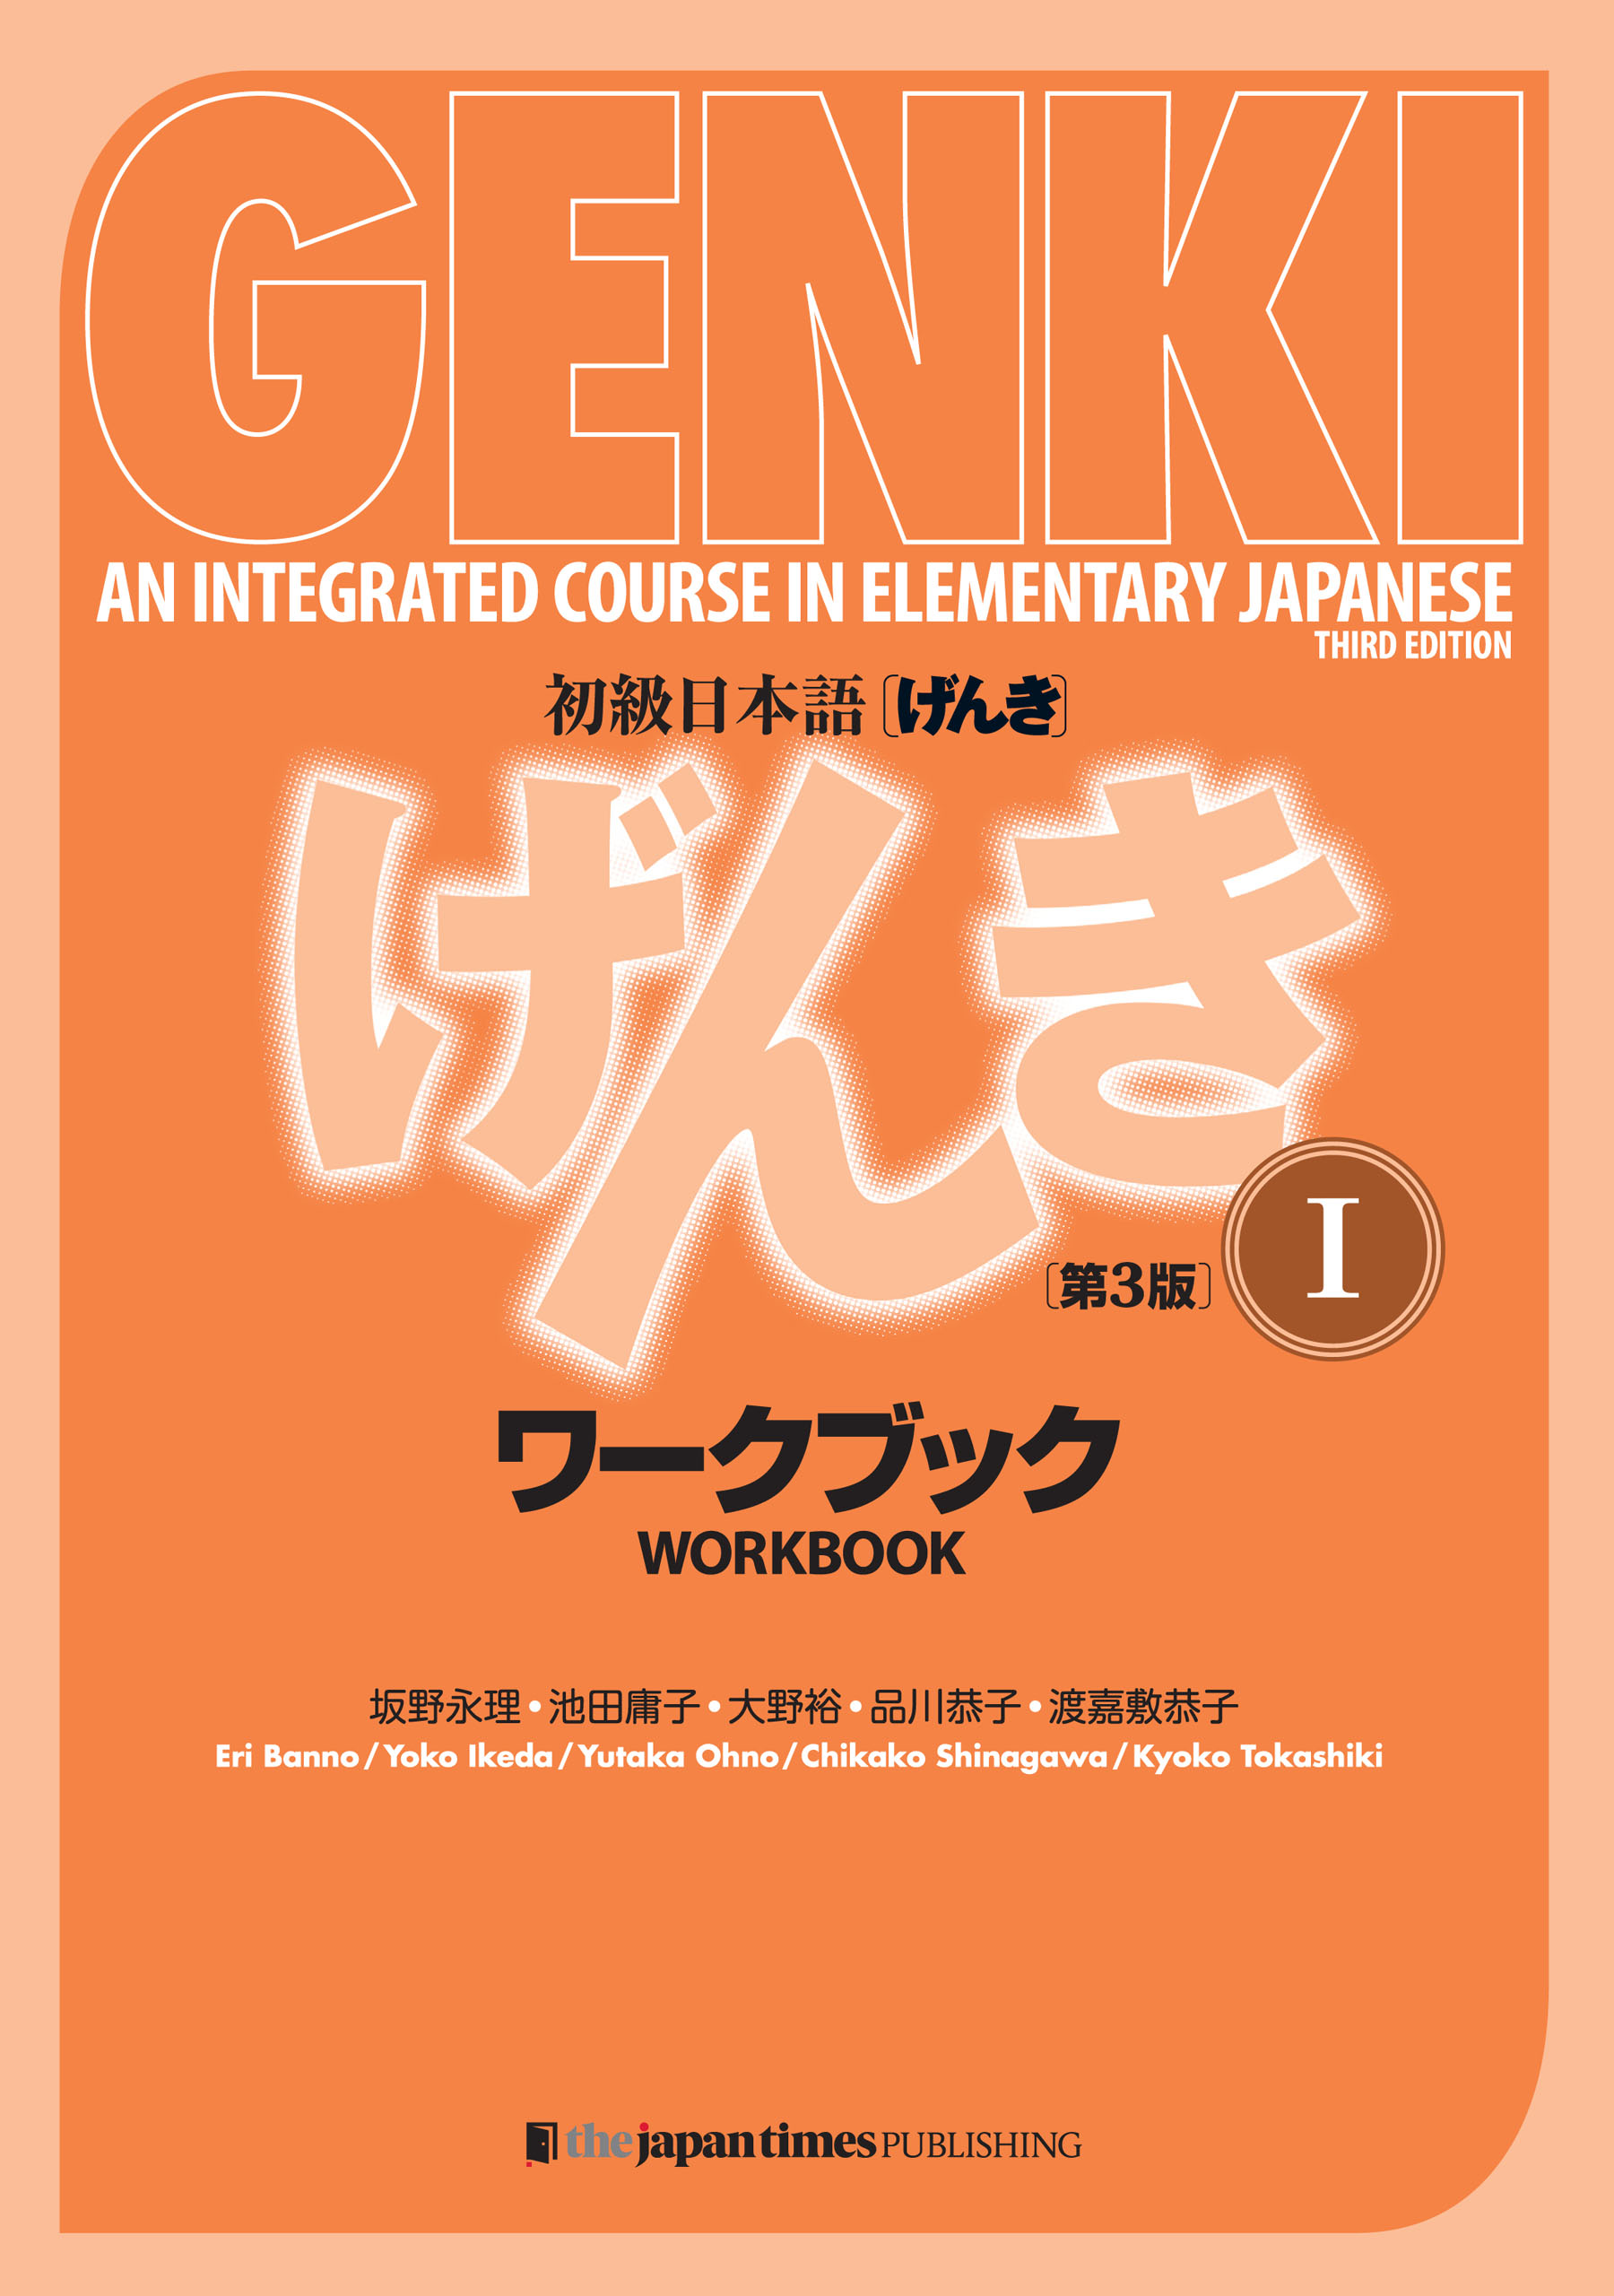 GENKI: An Integrated Course in Elementary Japanese 1 Workbook [Third  Edition] 初級日本語 げんき 1 ワークブック[第3版] - 坂野永理/池田庸子 - ビジネス・実用書・無料試し読みなら、電子書籍・コミックストア  ブックライブ